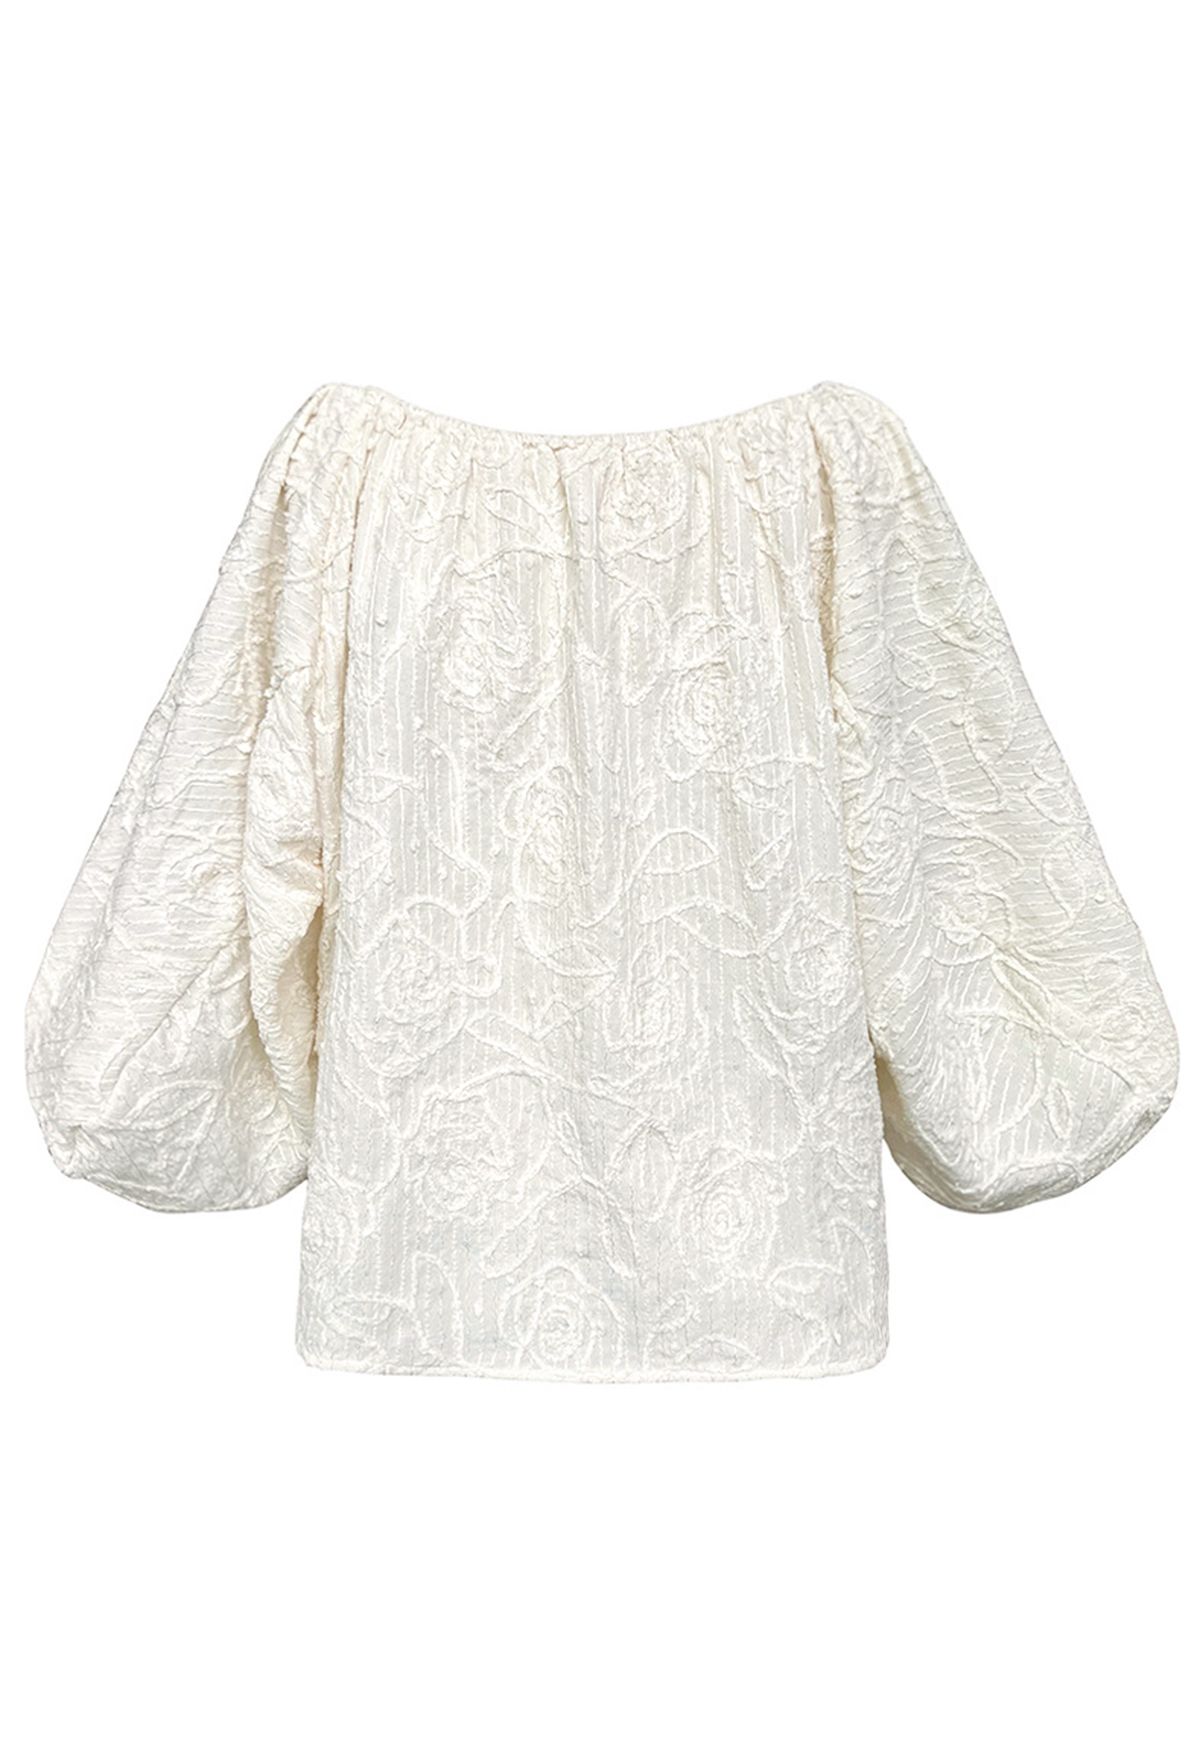 Floral Embroidery Jacquard Lantern Sleeve Top